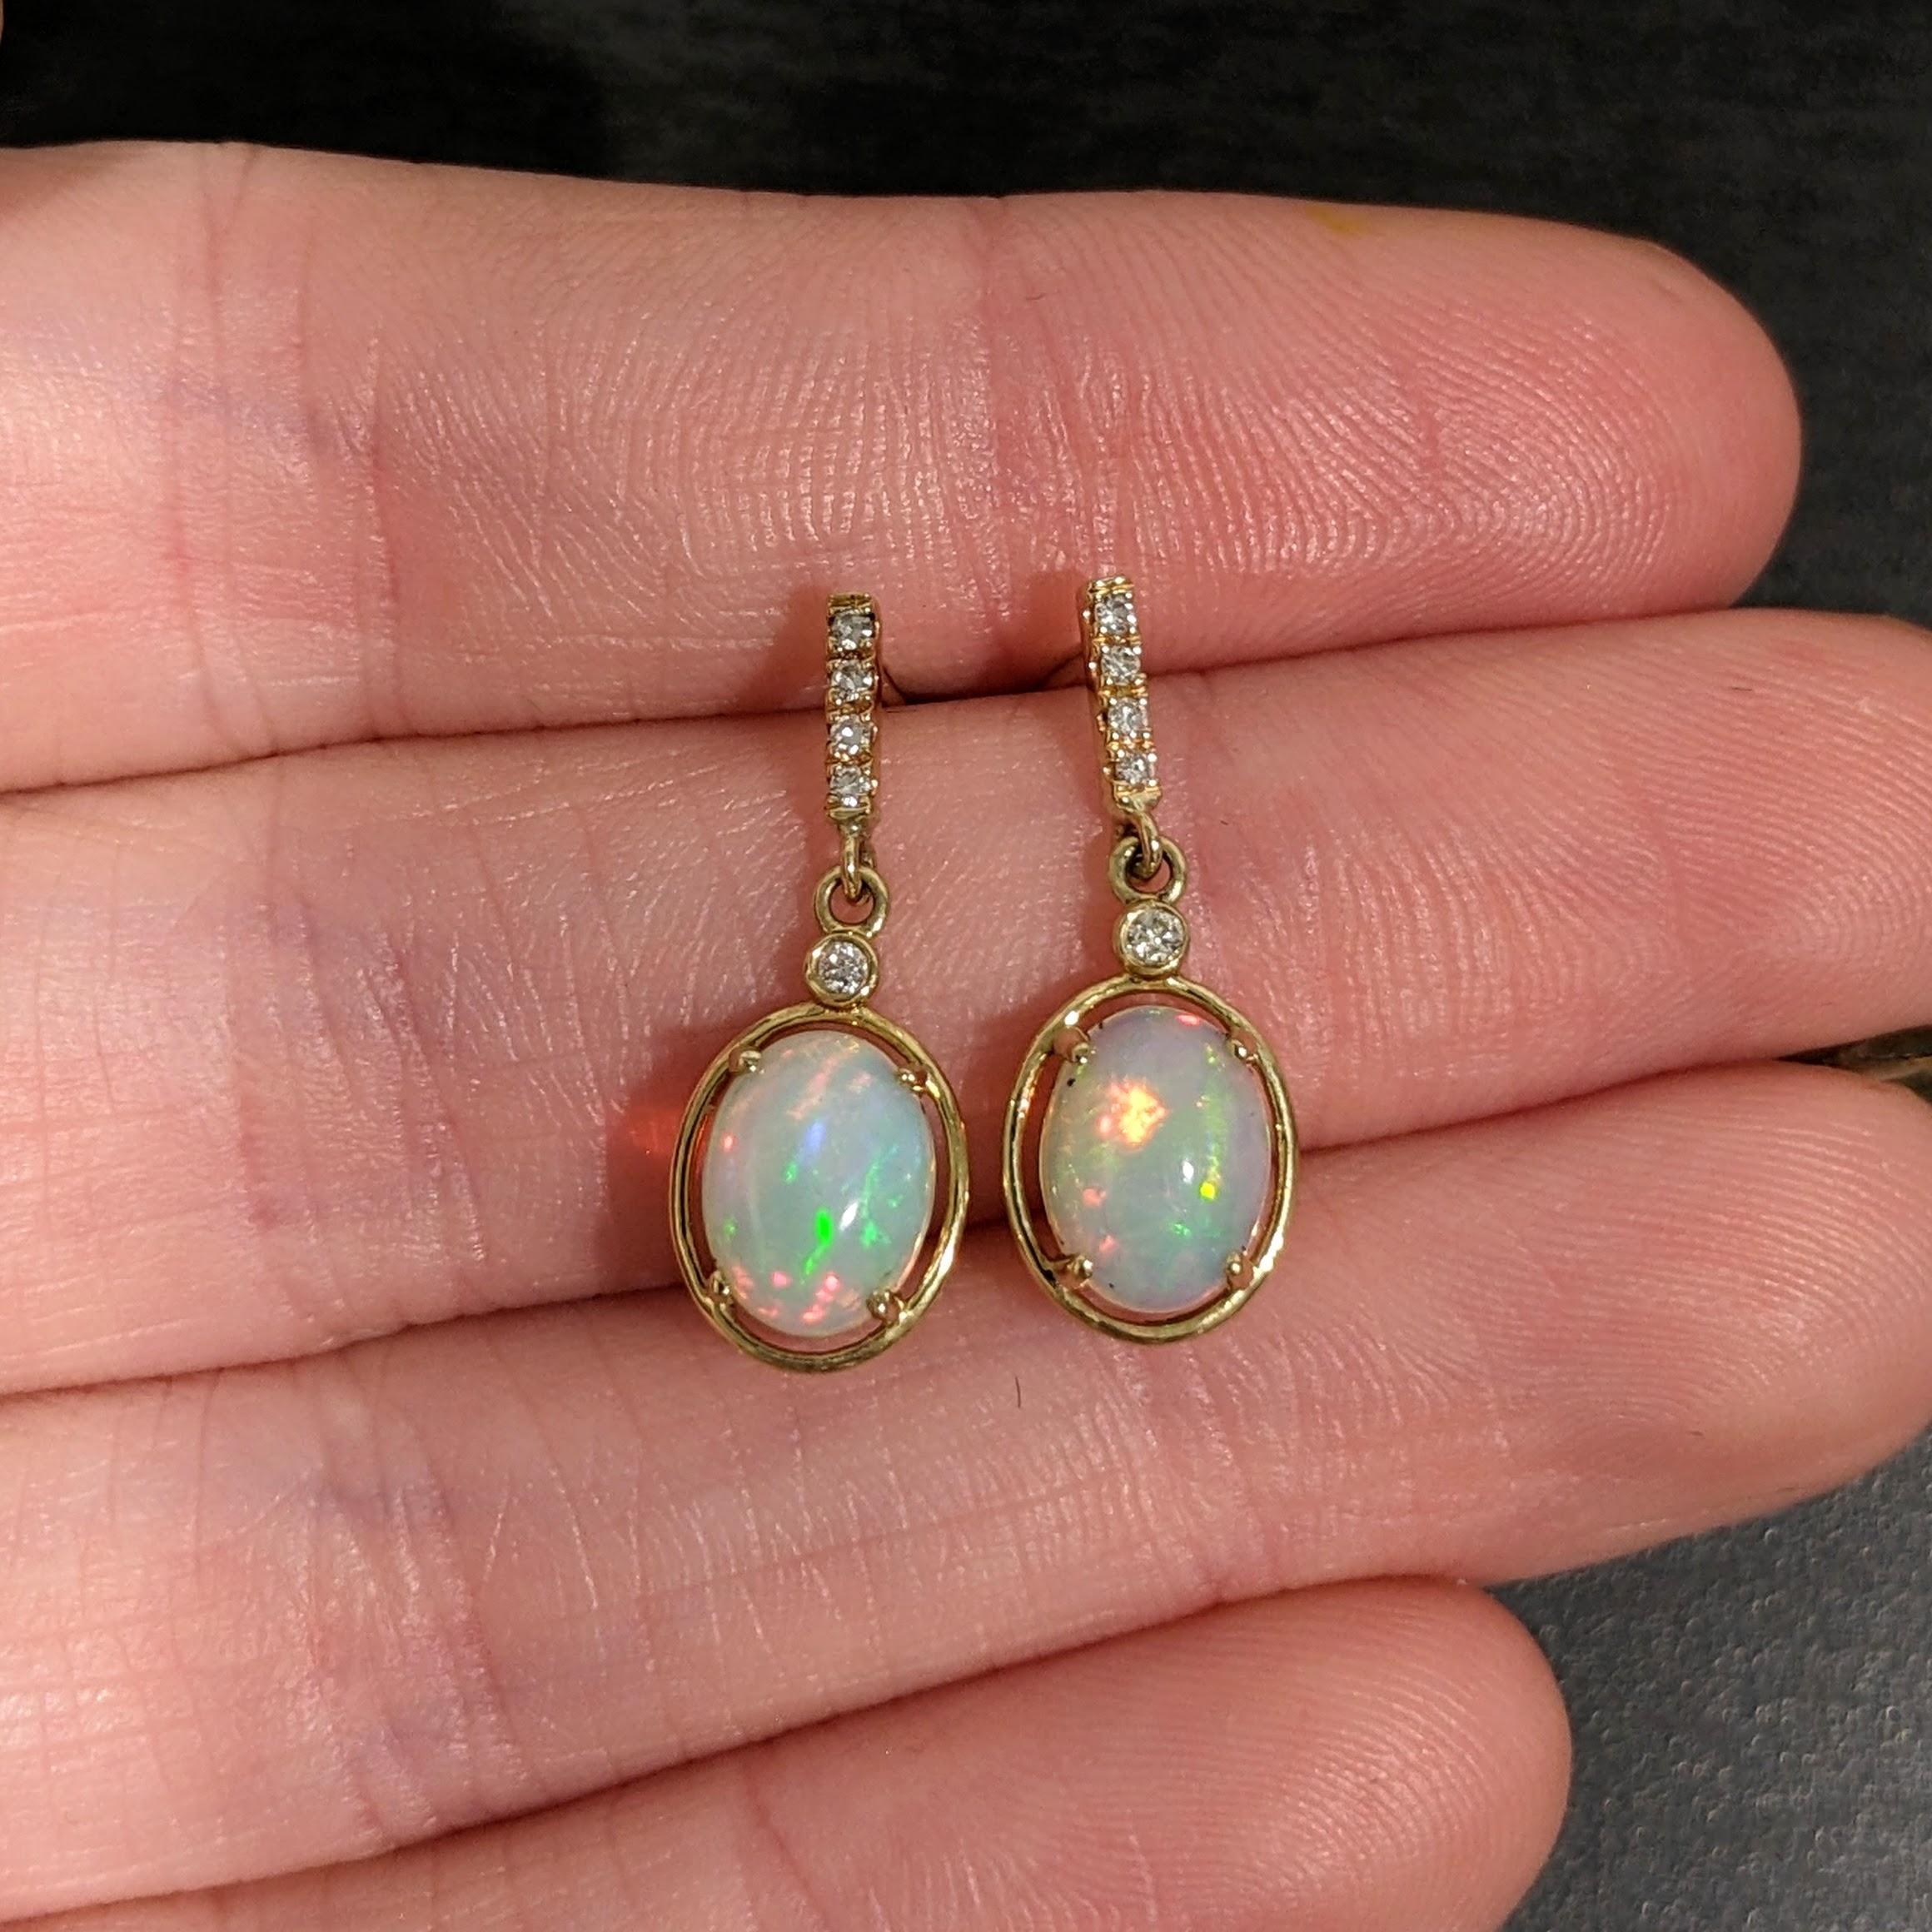 Women's 1.63ct Dangly Opal Drops w Diamond Accents in 14k Solid Yellow Gold Oval 10x8mm